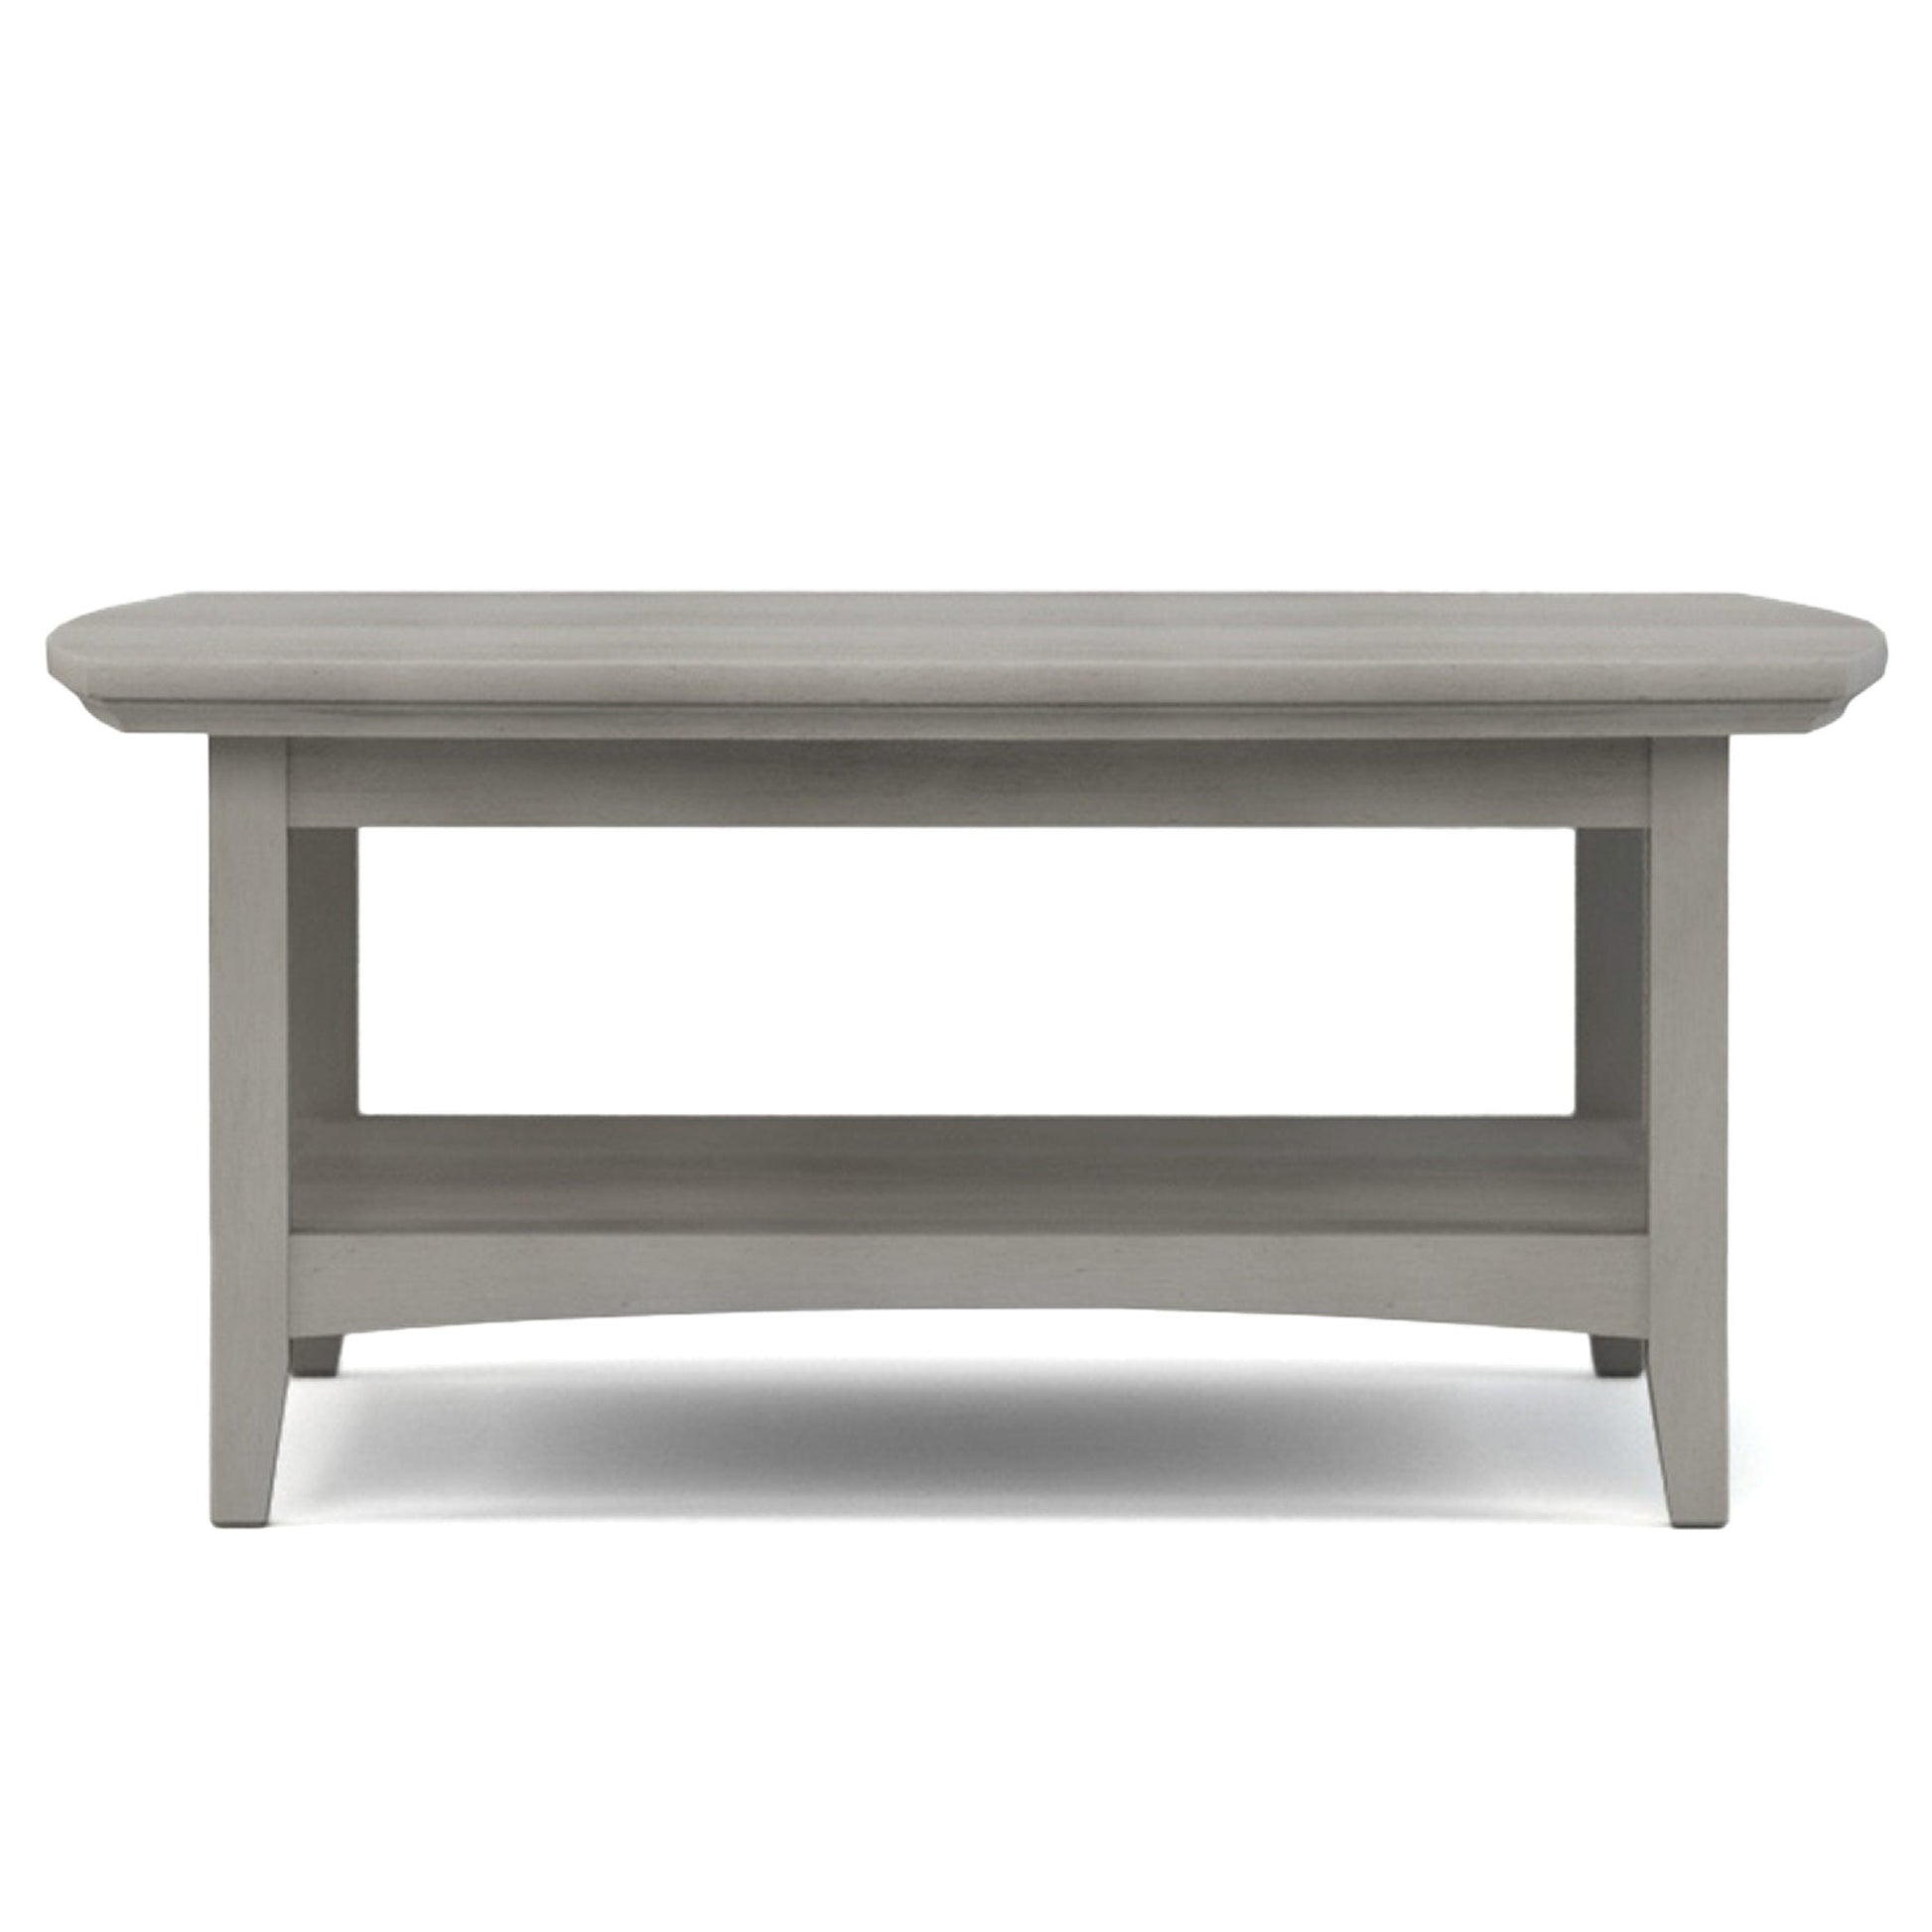 Revere Curved Square Coffee Table